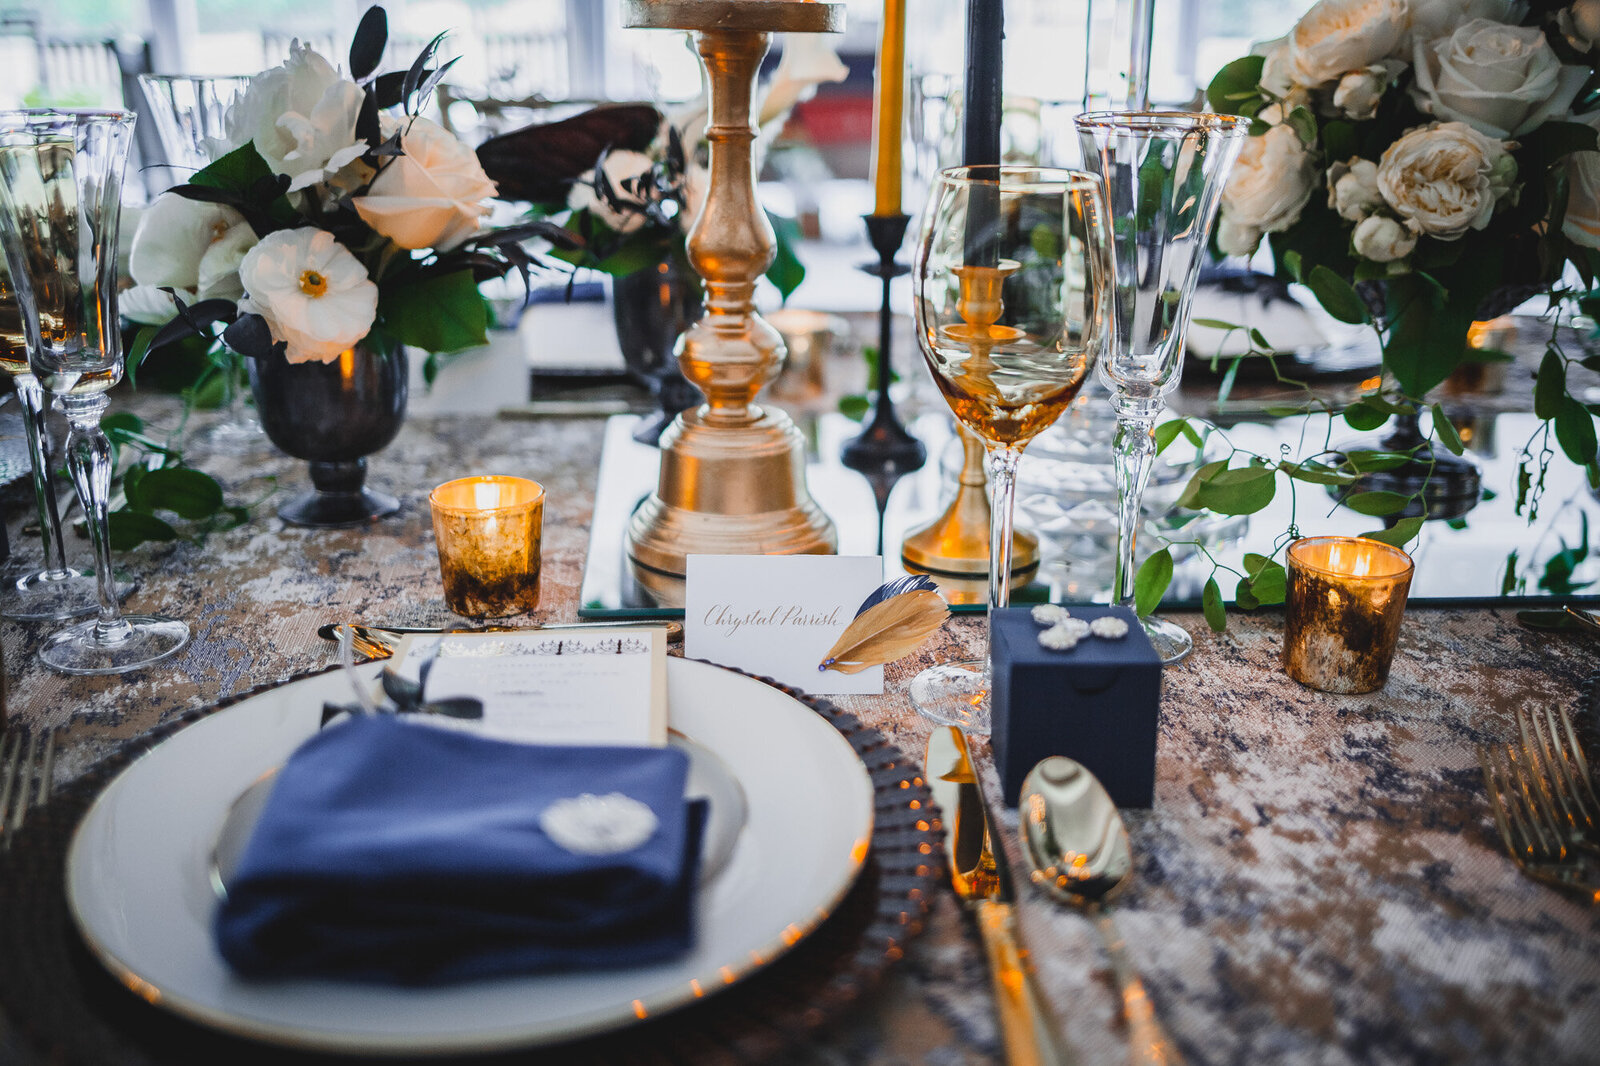 Wedding reception table that has dinnerwares, glasses, candles and floral centerpieces